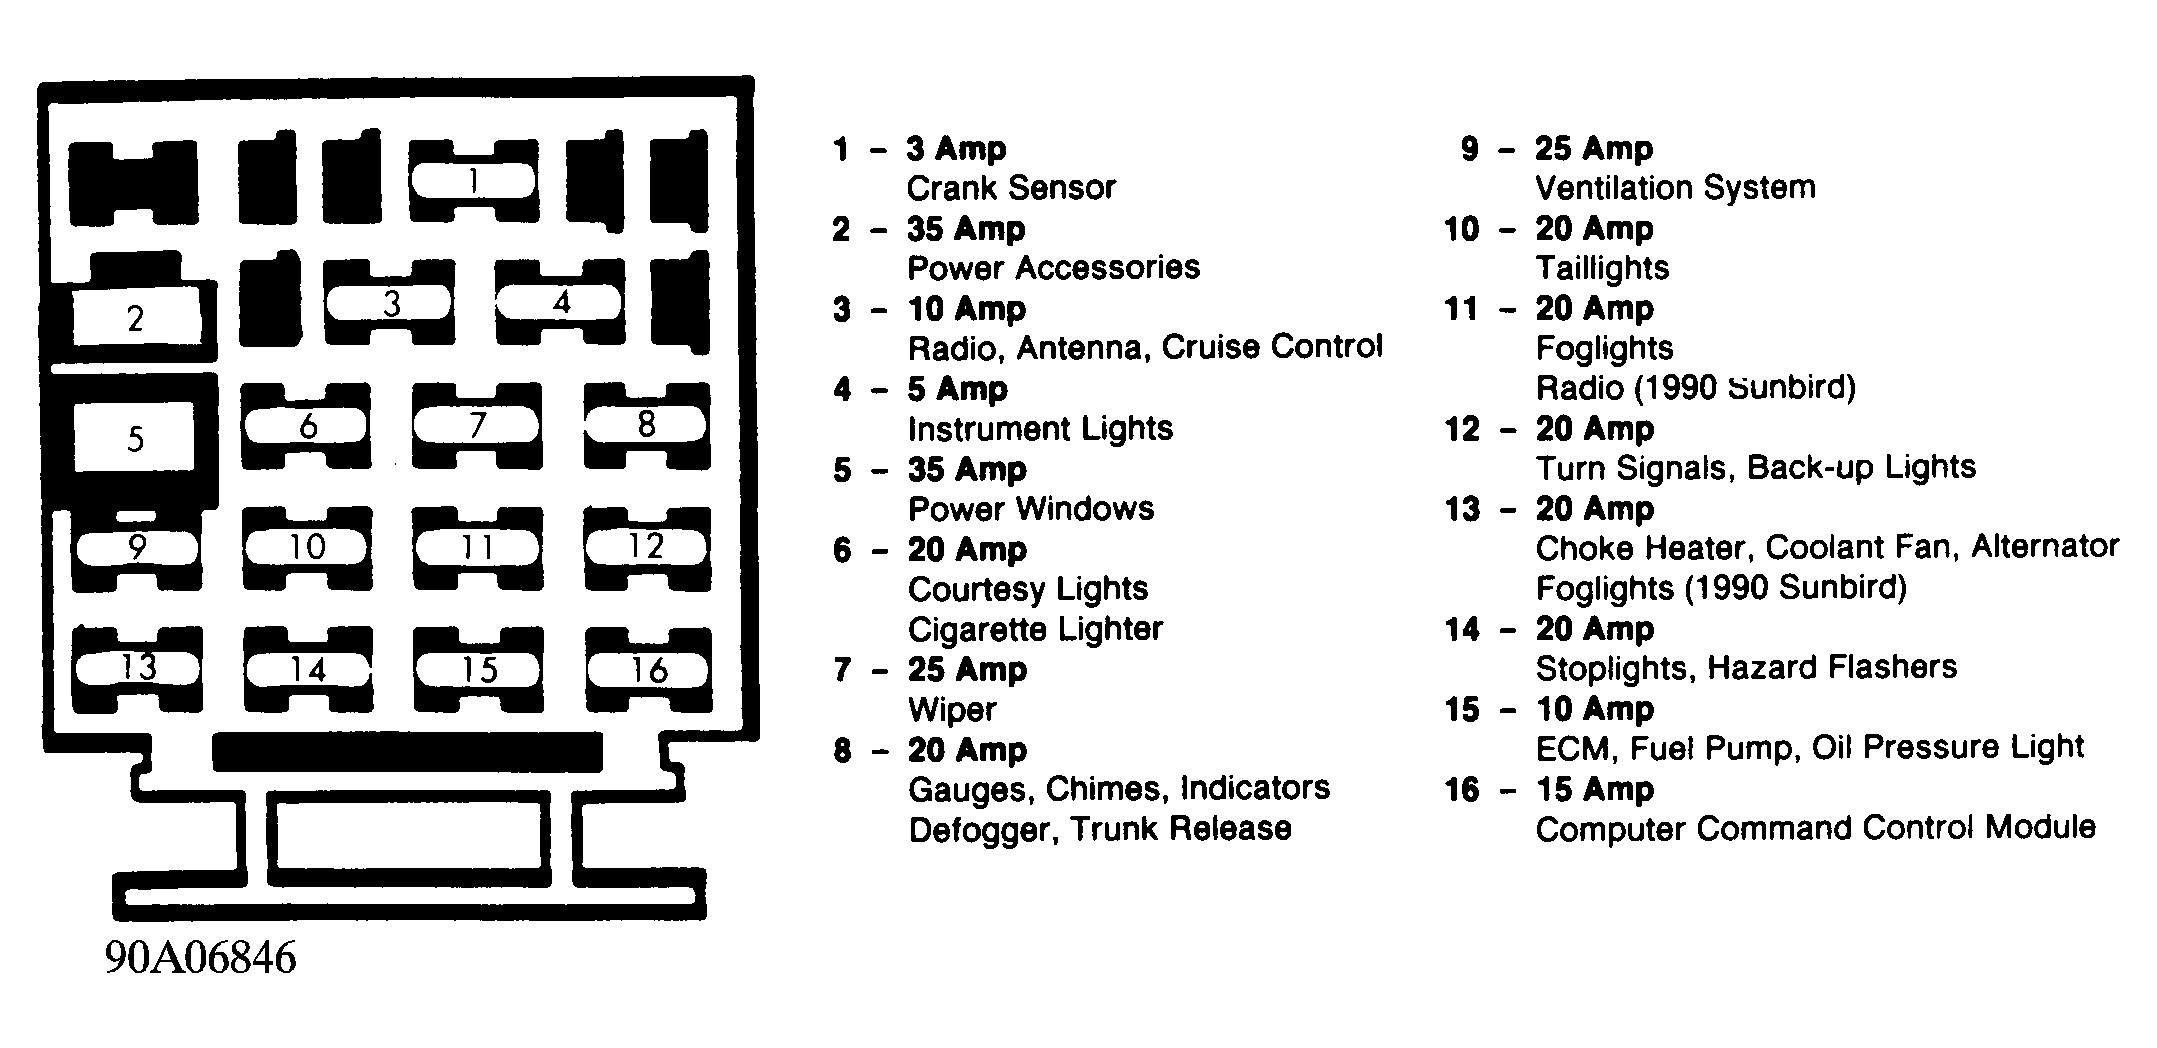 Chevrolet Cavalier 1994 - Component Locations -  Fuse Panel Identification (Typical 1983-90 Models)